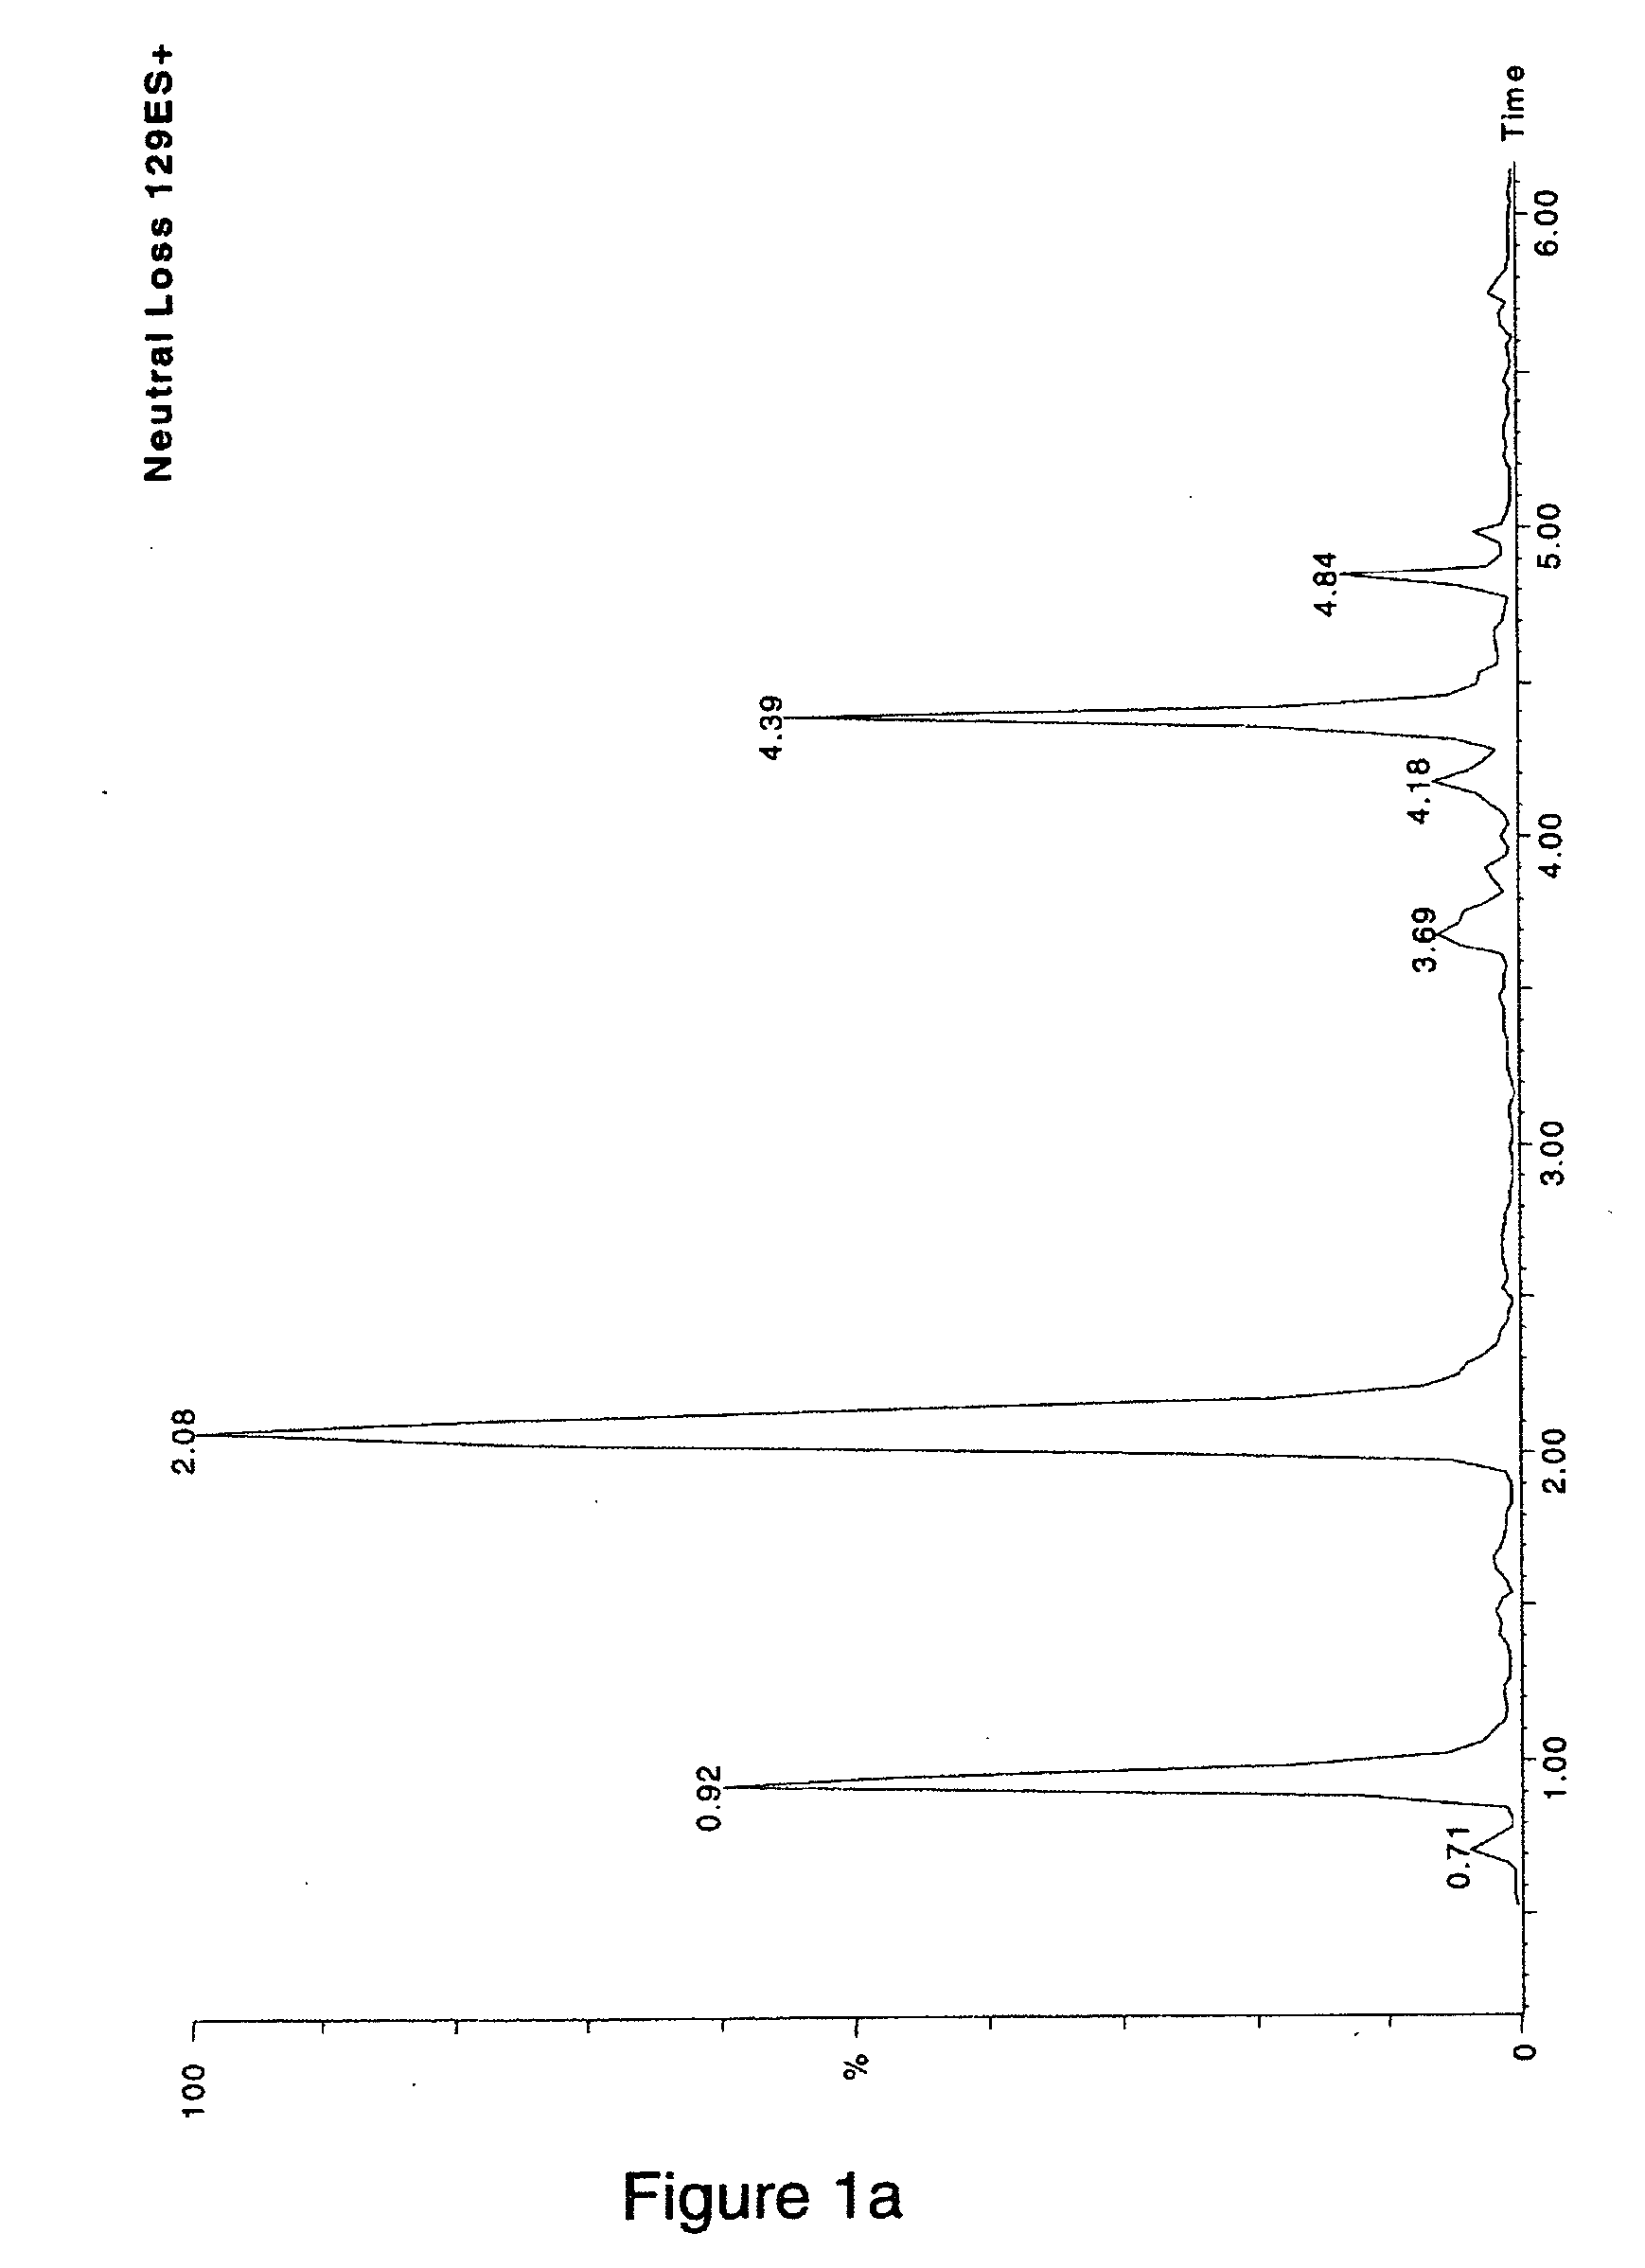 Method for detecting reactive metabolites using stable-isotope trapping and mass spectroscopy